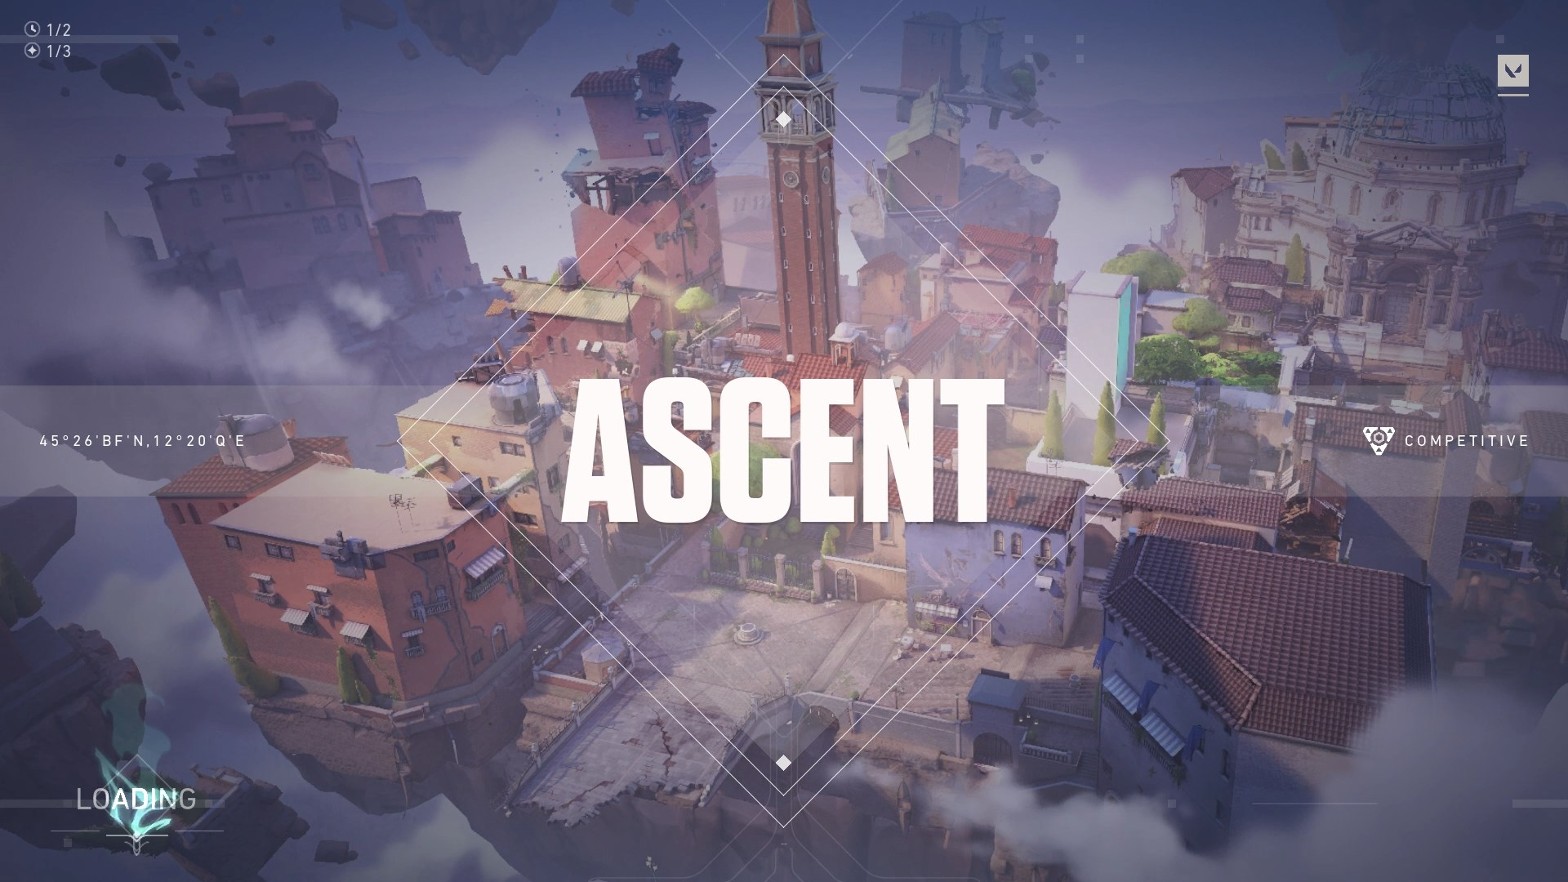 Valorant Ascent - All The Secrets Of Ascent, The Map Of Valorant. Spike  Spot, Short & Long, Windows & Banana, Various Tactics Be An Expert On  Ascent.